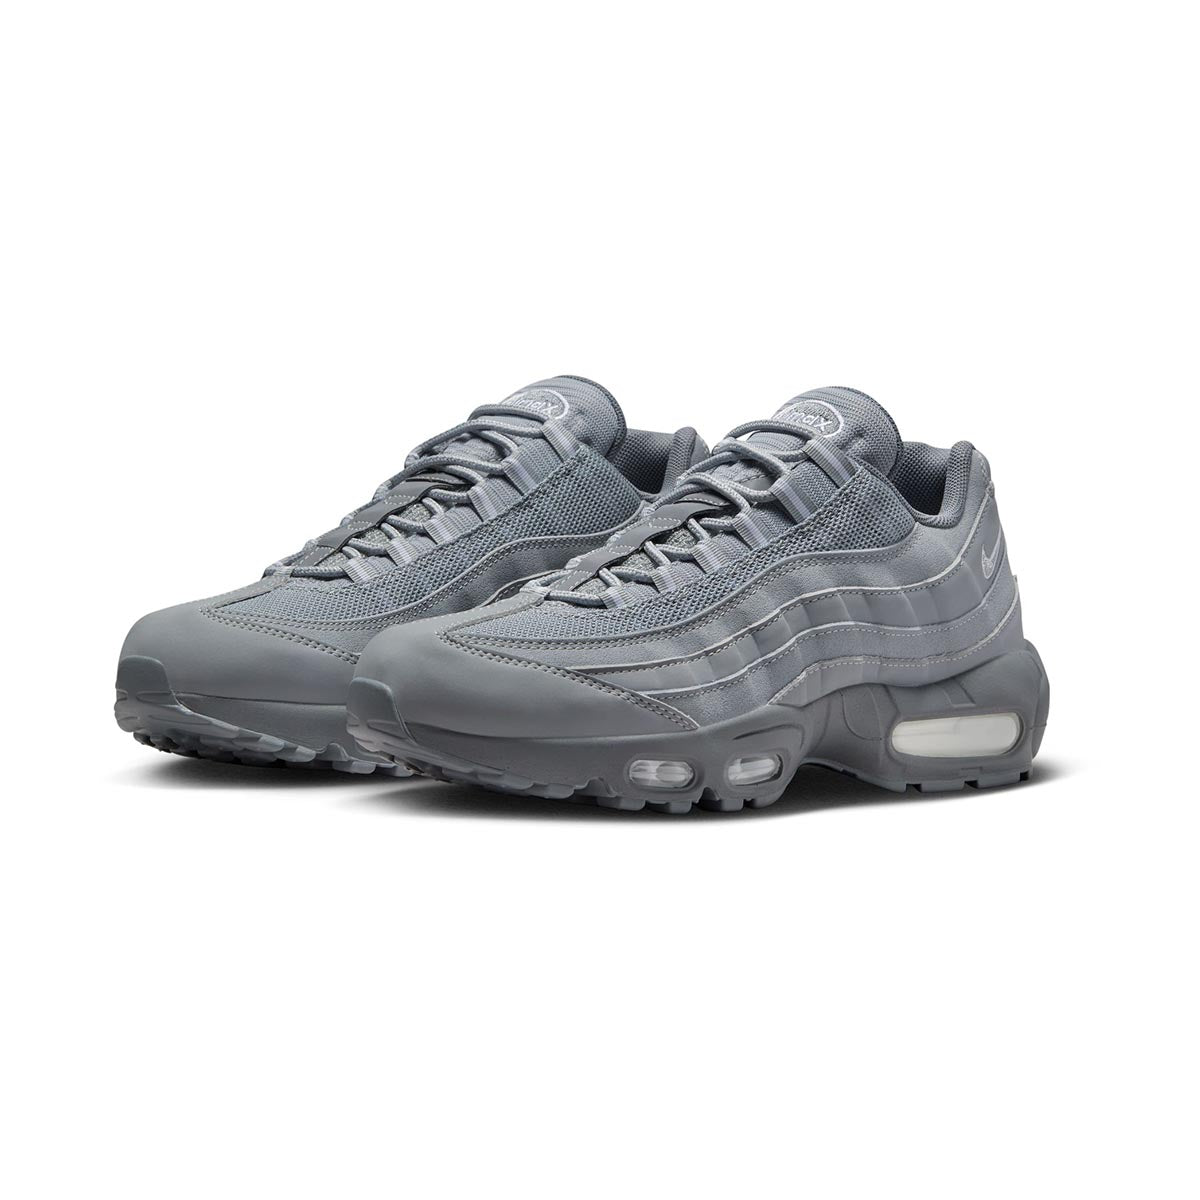 Nike Men's Air Max 95 Casual Shoes in Grey/Wolf Grey Size 8.0 | Nylon